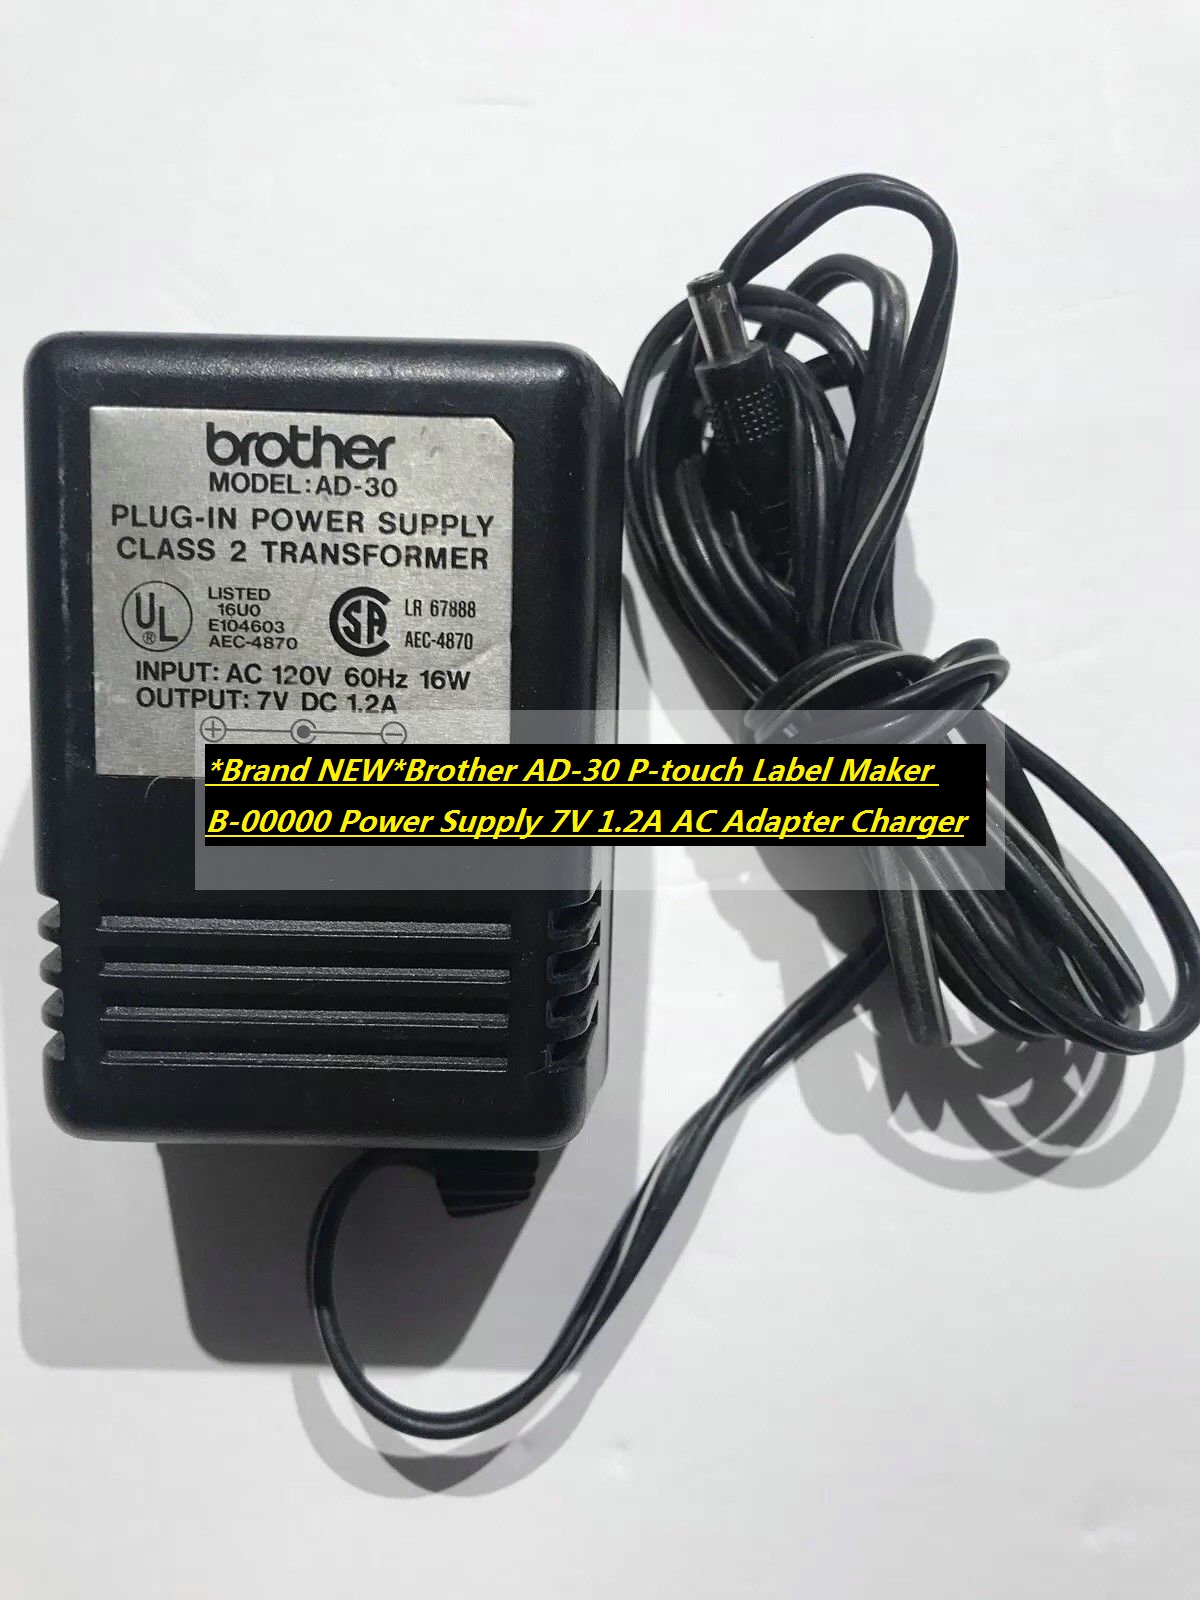 *Brand NEW*Brother AD-30 P-touch Label Maker B-00000 Power Supply 7V 1.2A AC Adapter Charger